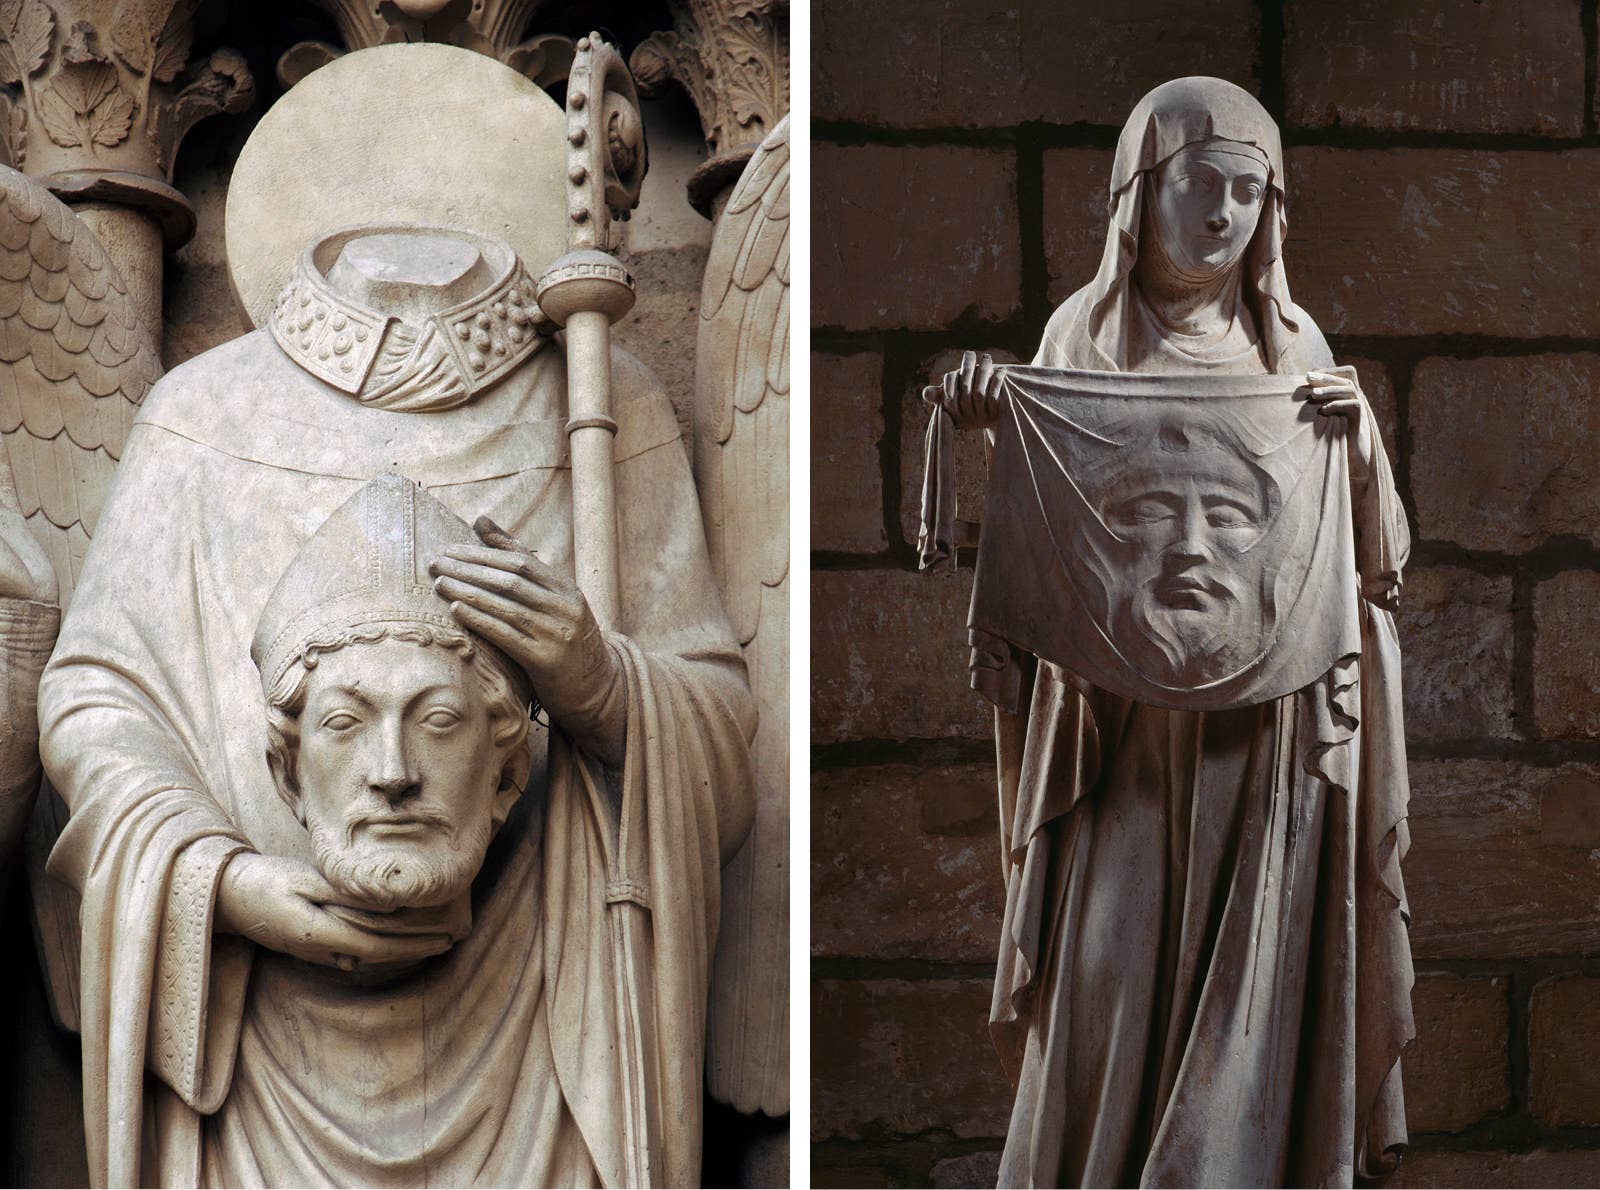 The exterior of the cathedral is adorned with sculptures illustrating biblical stories, known as the "poor people's book," as, historically, the majority of parishioners could not read. Left: Christian martyr Saint Denis holding his head; Right: Statue of Saint Veronique holding the shroud of Christ